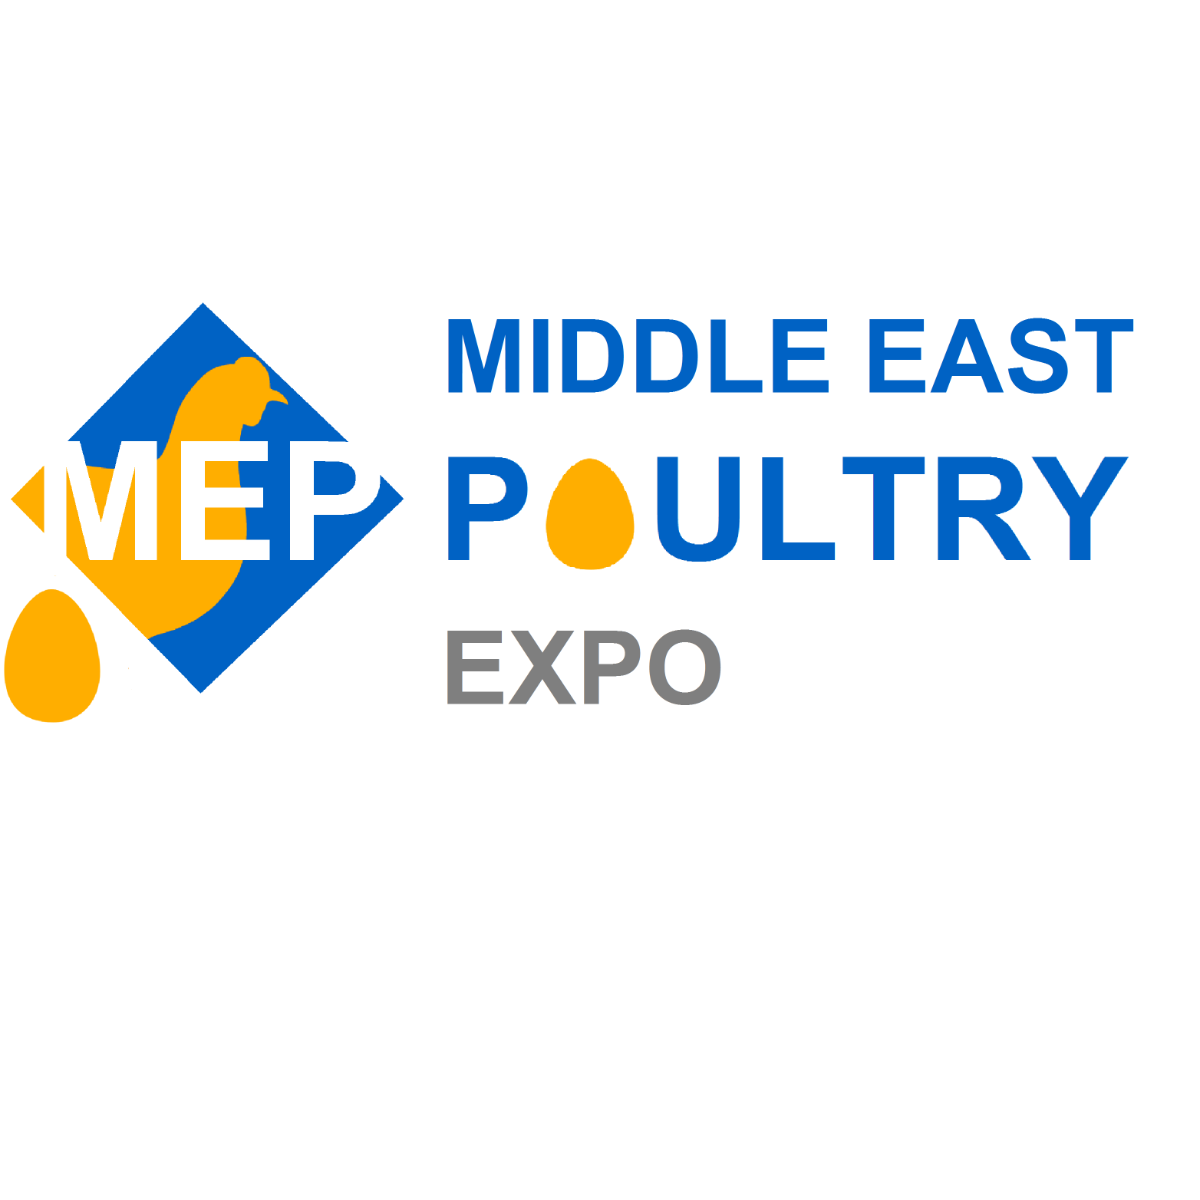 Middle East Poultry Expo Giovo Egg Handling Innovations